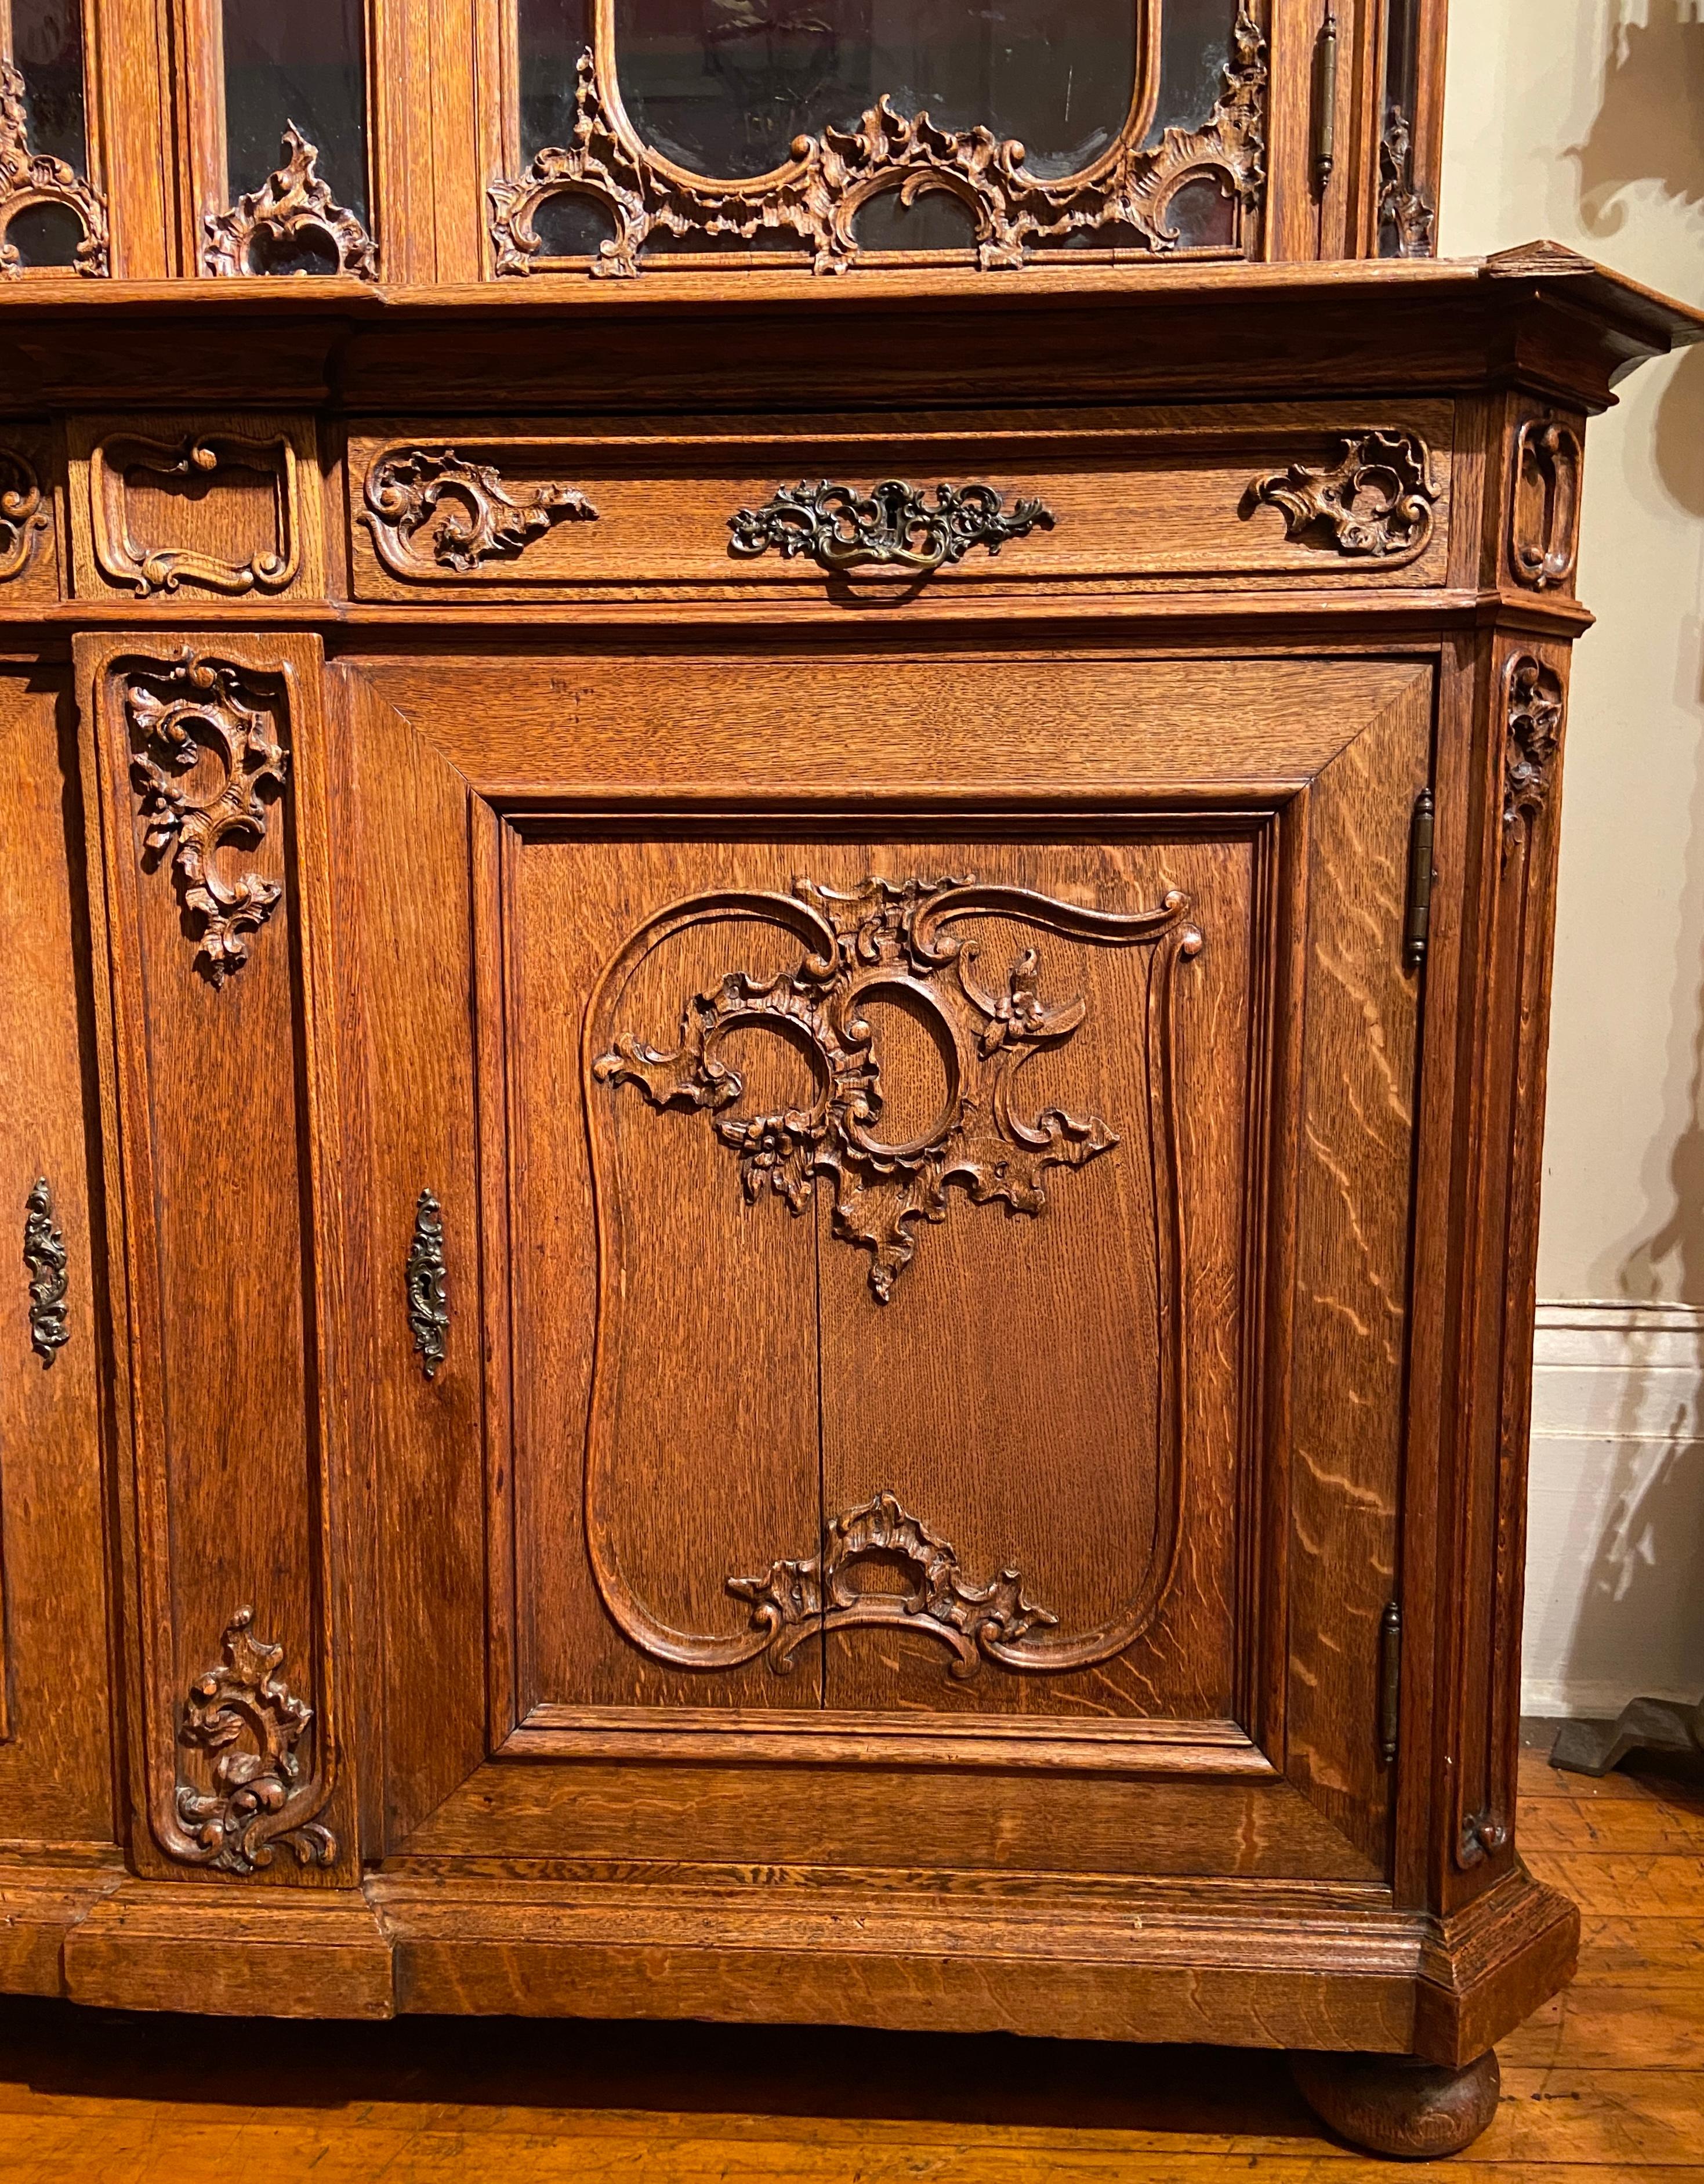 Antique French Liégeoise Carved Cabinet with Glass Front Doors, Circa 1860-1880 For Sale 5